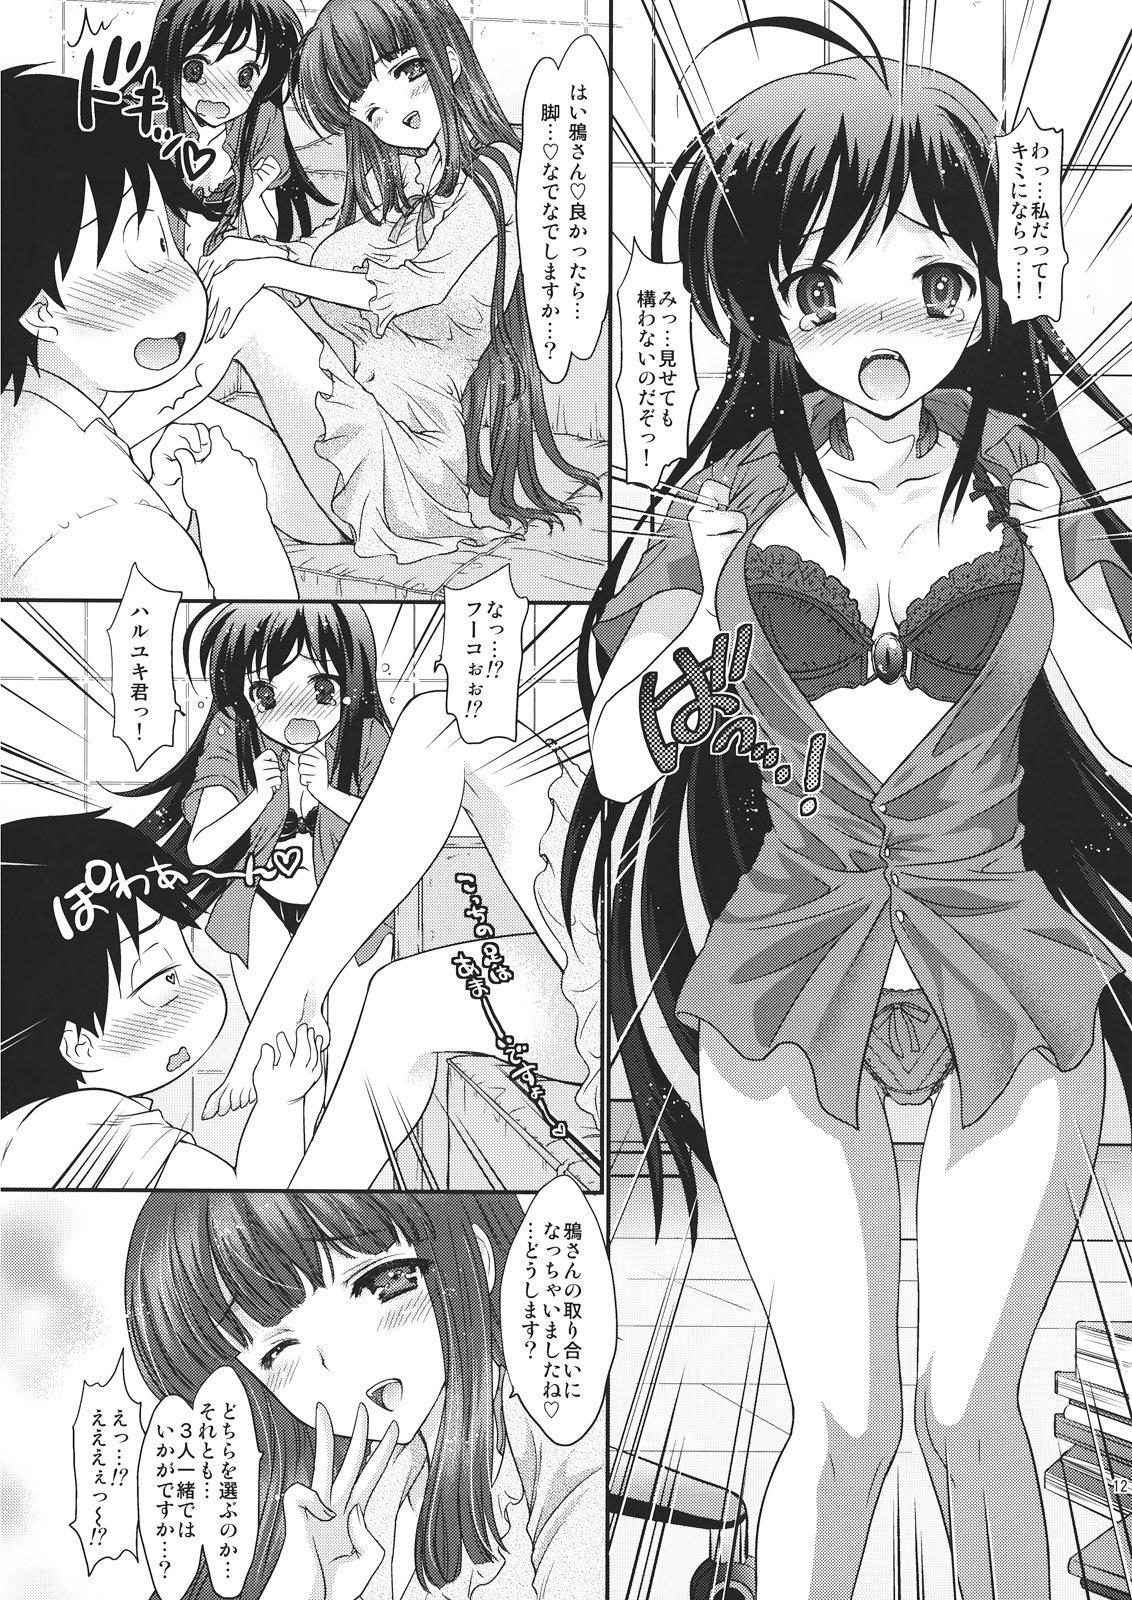 Latex Double Accel - Accel world Porra - Page 12